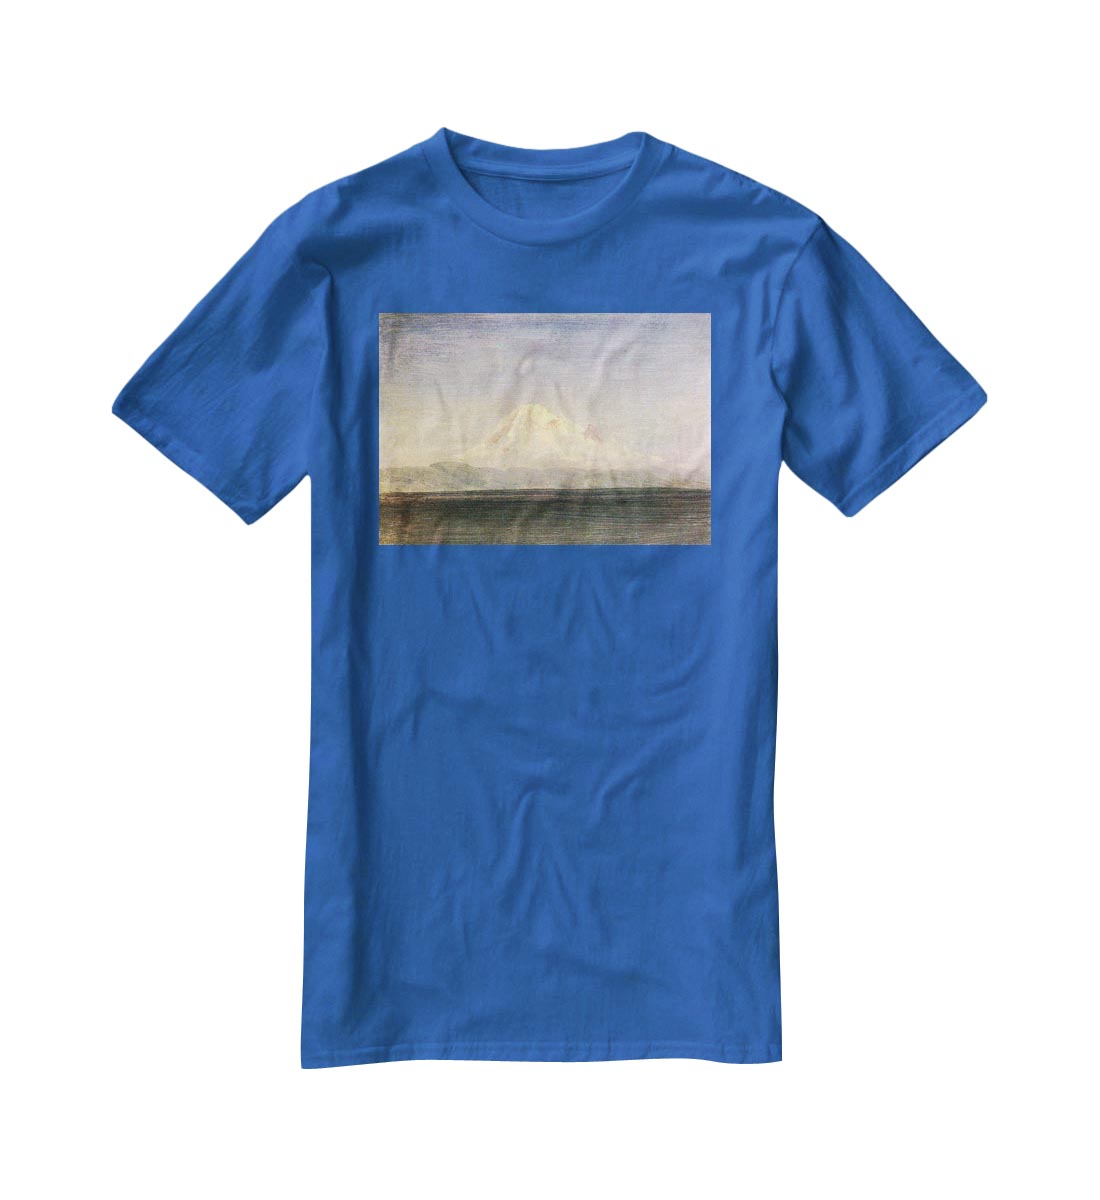 Snowy Mountains in the Pacific Northwest by Bierstadt T-Shirt - Canvas Art Rocks - 2